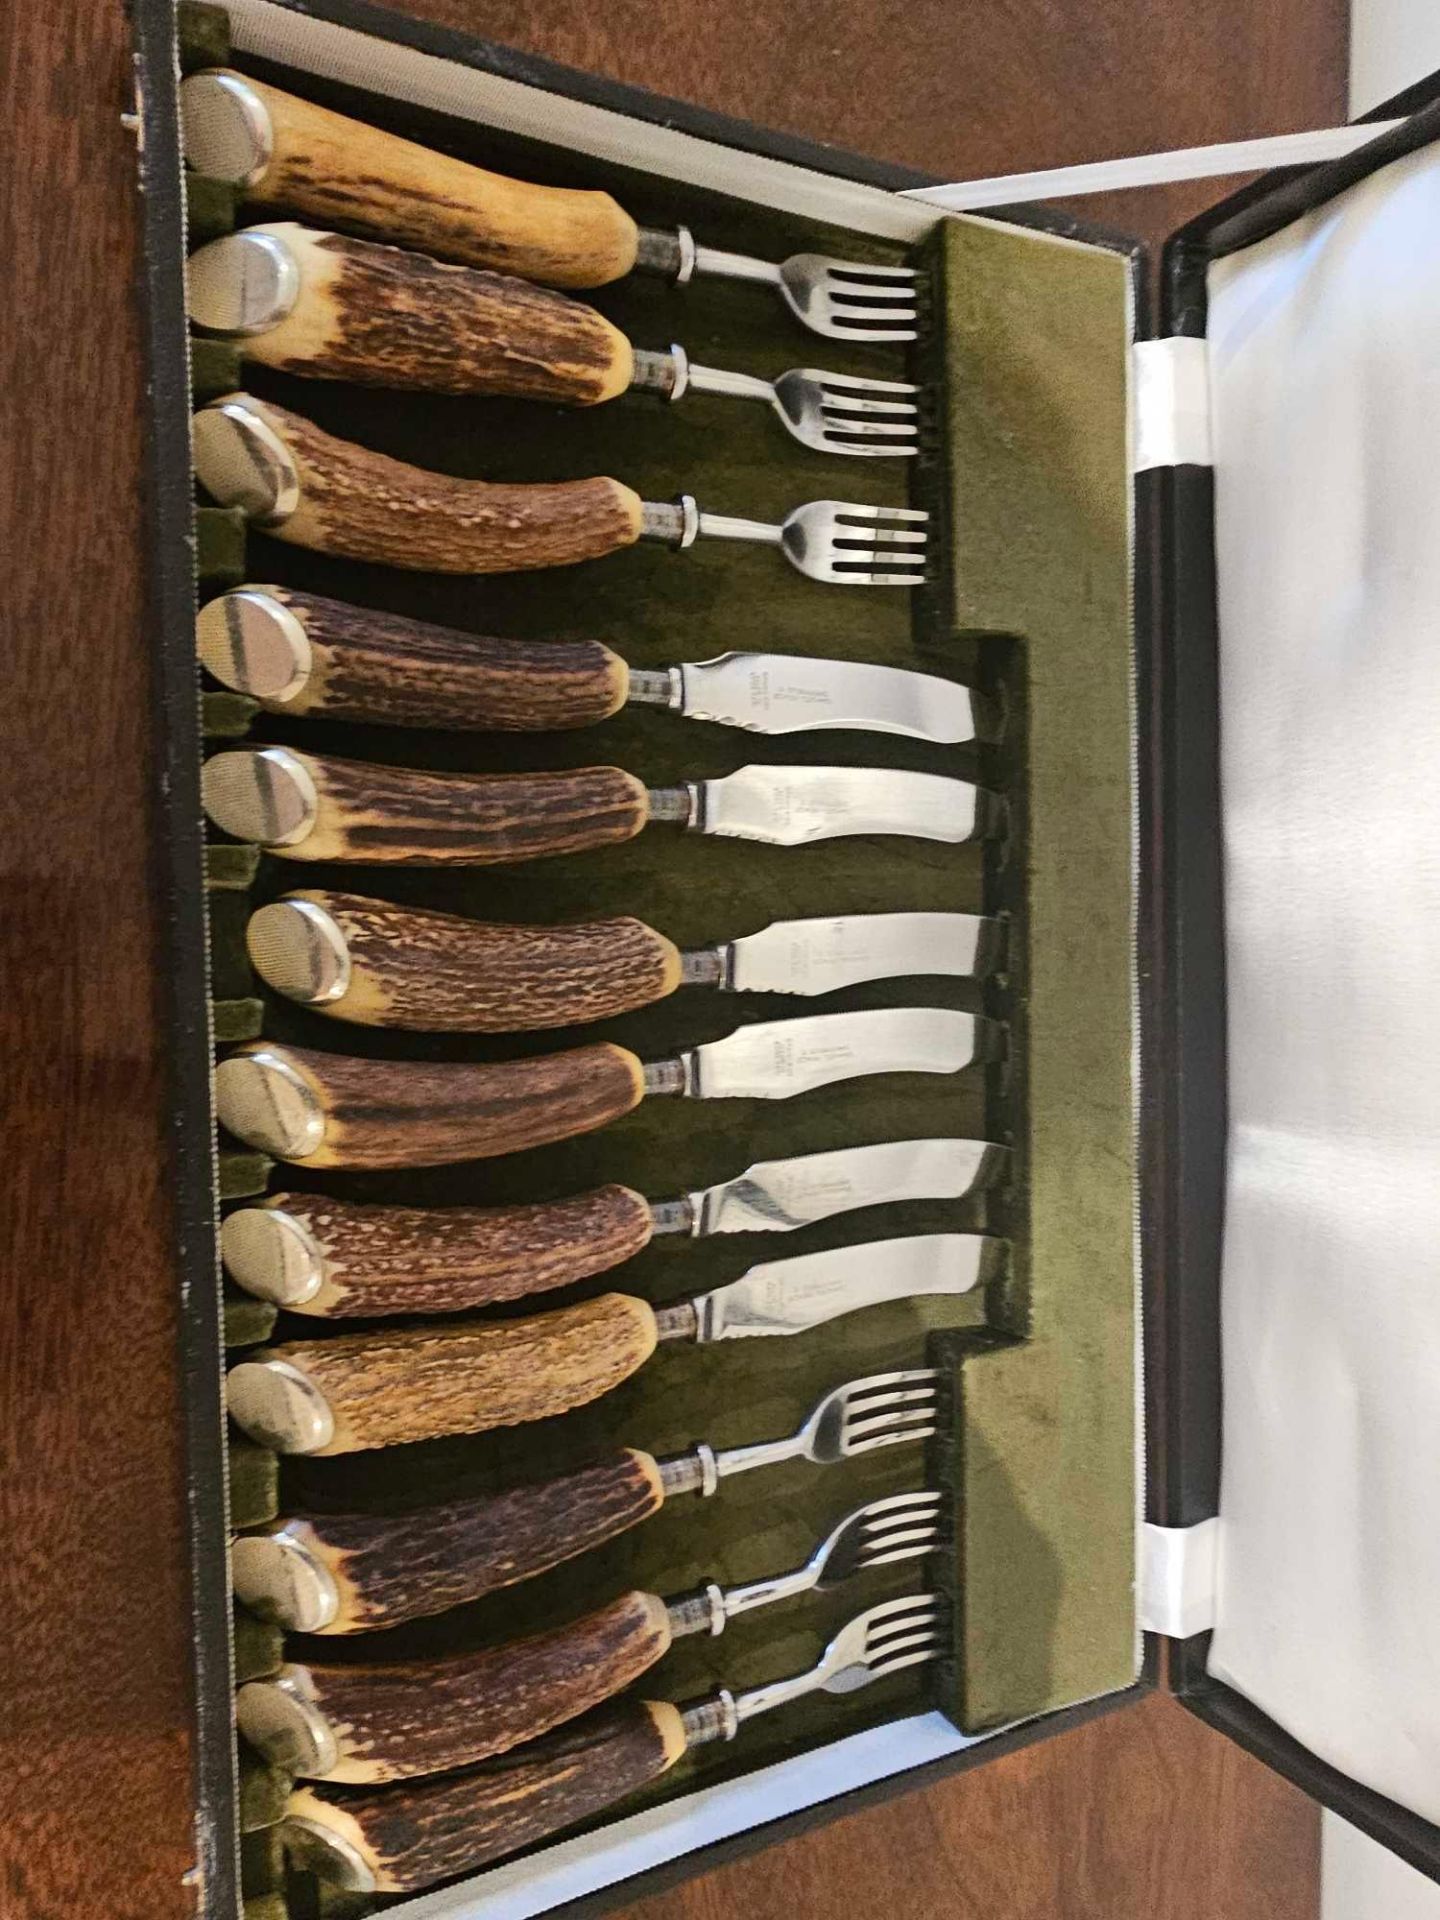 Samuel Peace Sheffield For Harrods Cased Steak Carving Set Of Six Knives And Forks Stainless Steel - Image 3 of 4